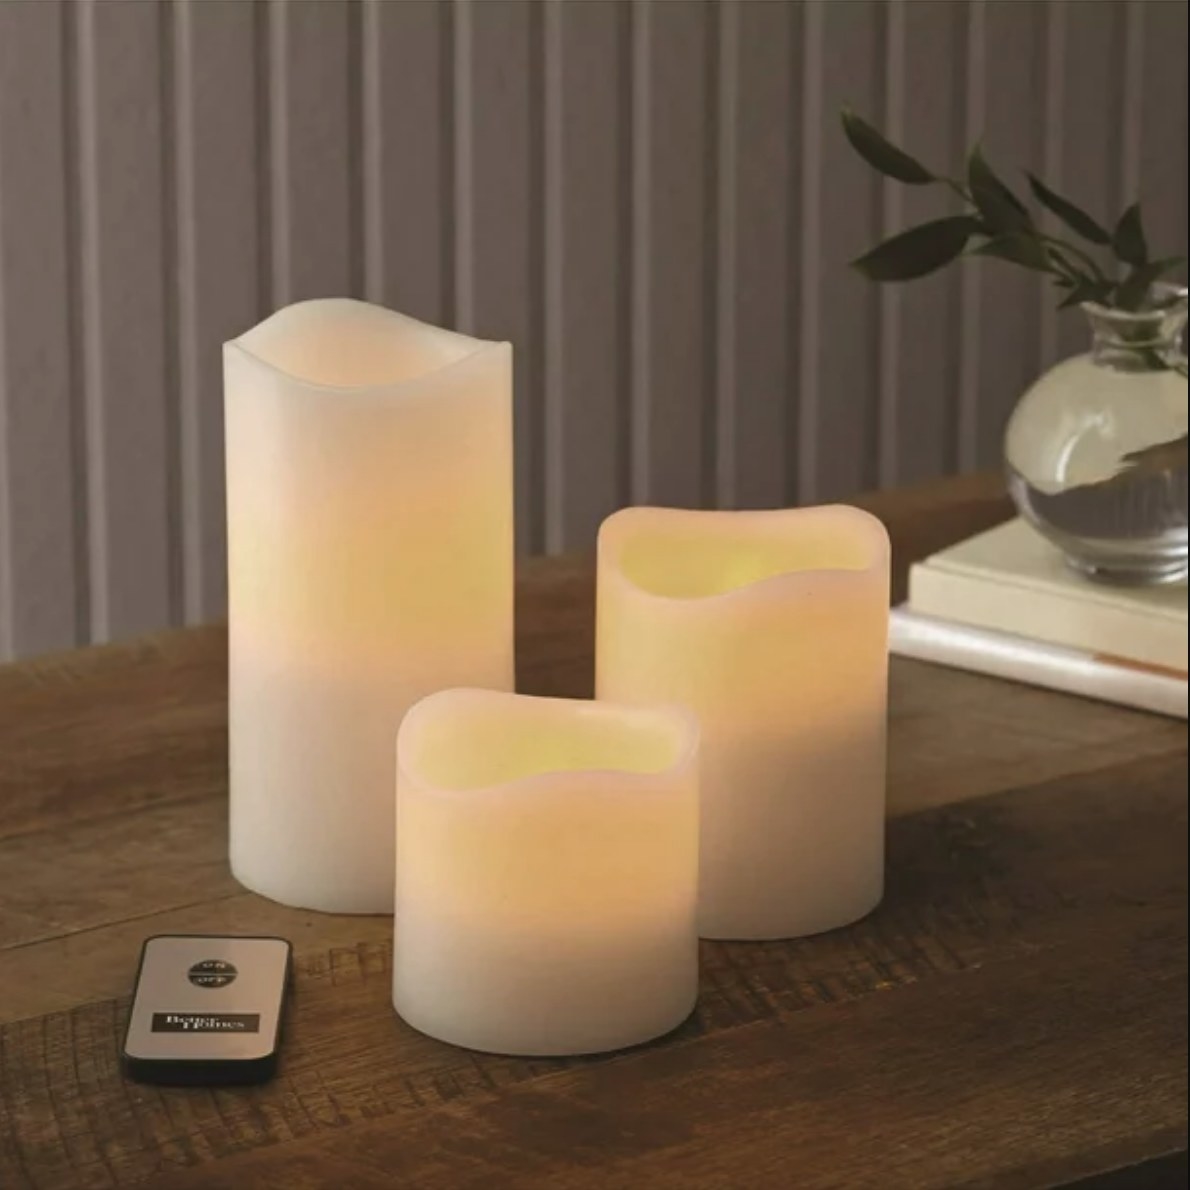 Three flameless white candles on wooden table